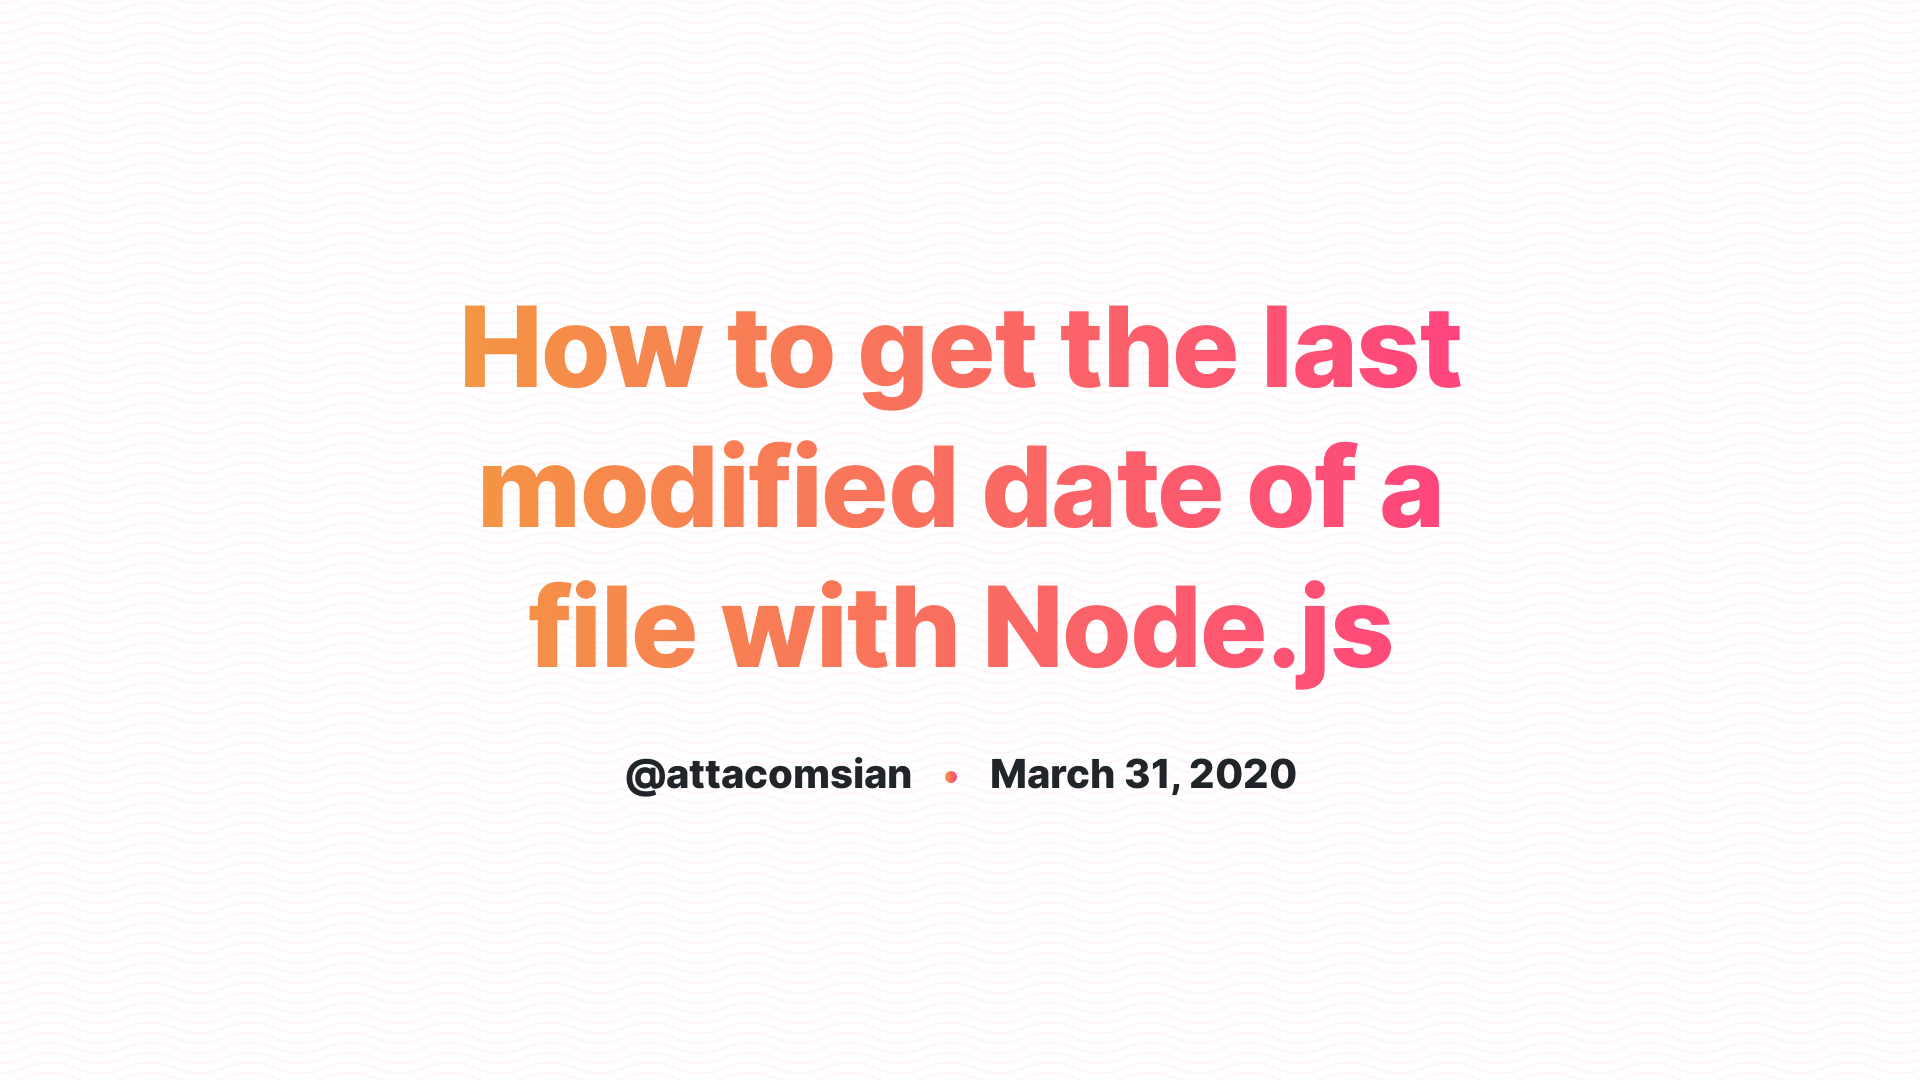 cmd find file last modified on specific date